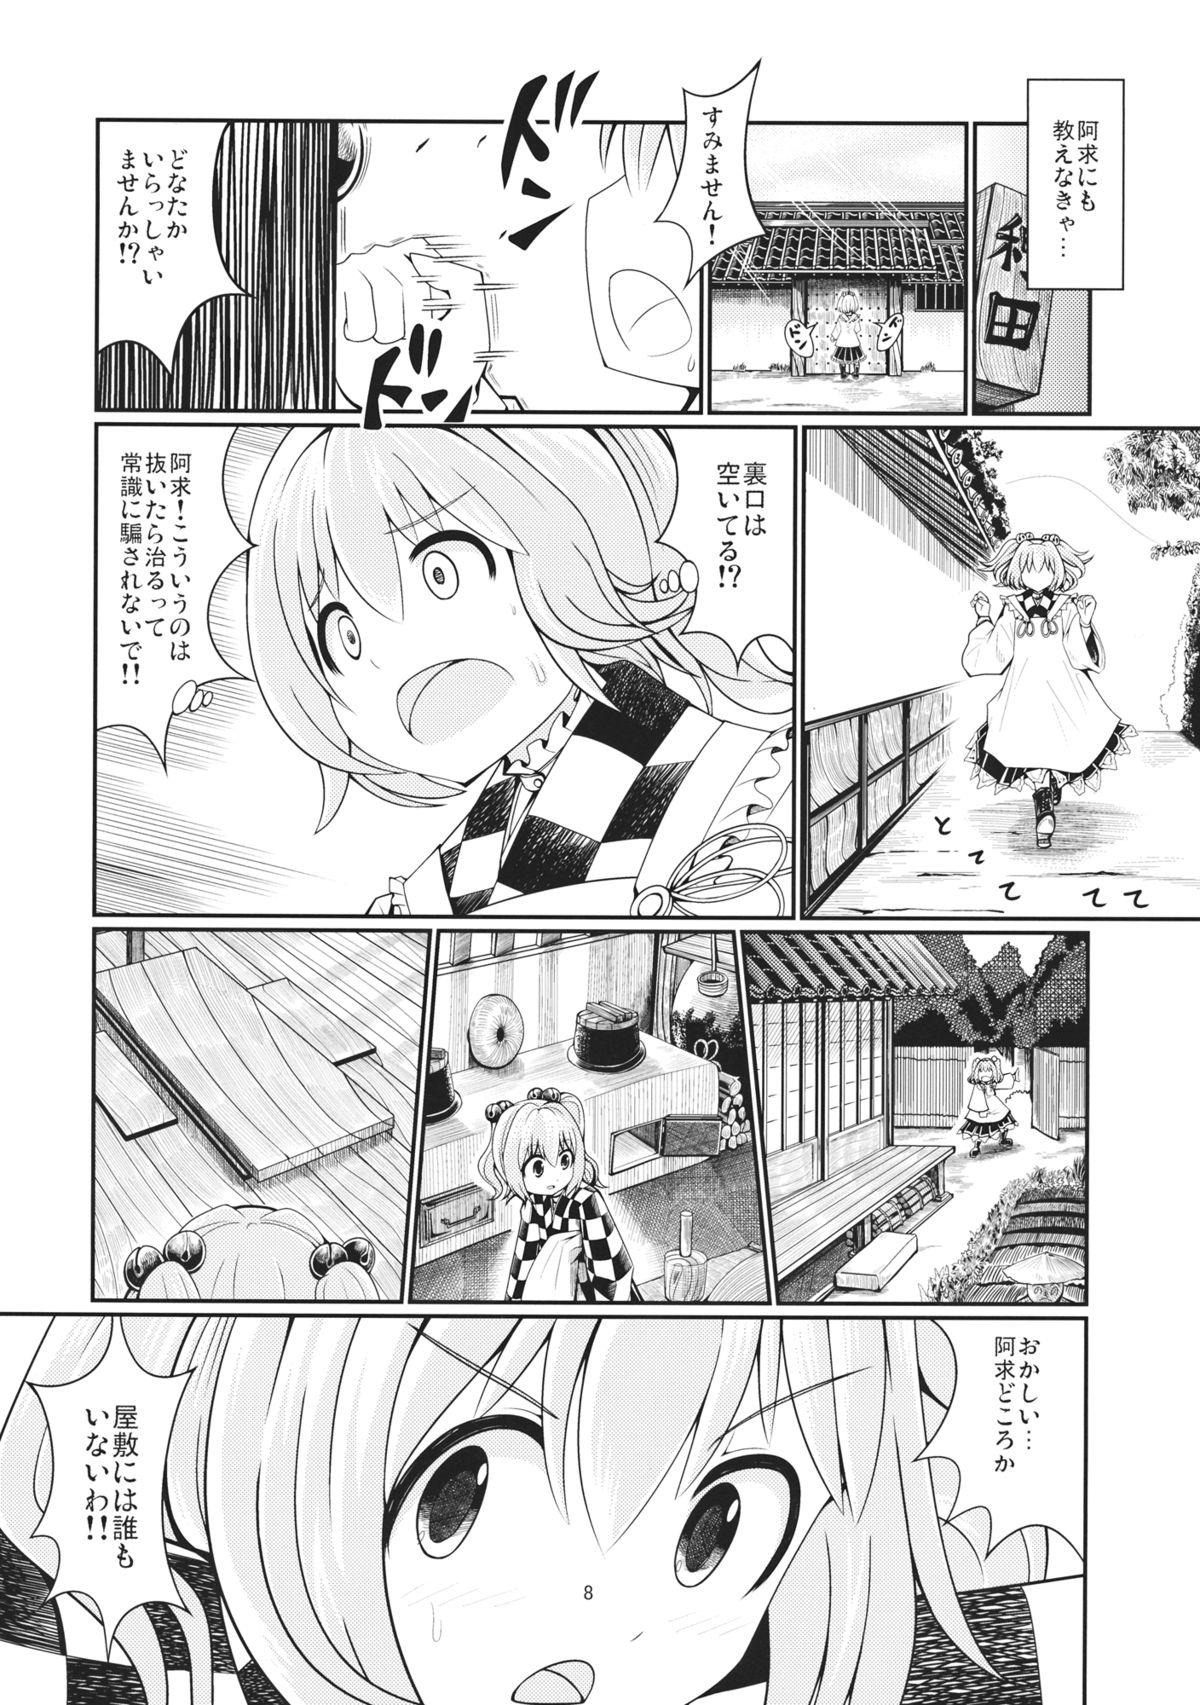 Boy Reverse Sexuality 2 - Touhou project Public Fuck - Page 7